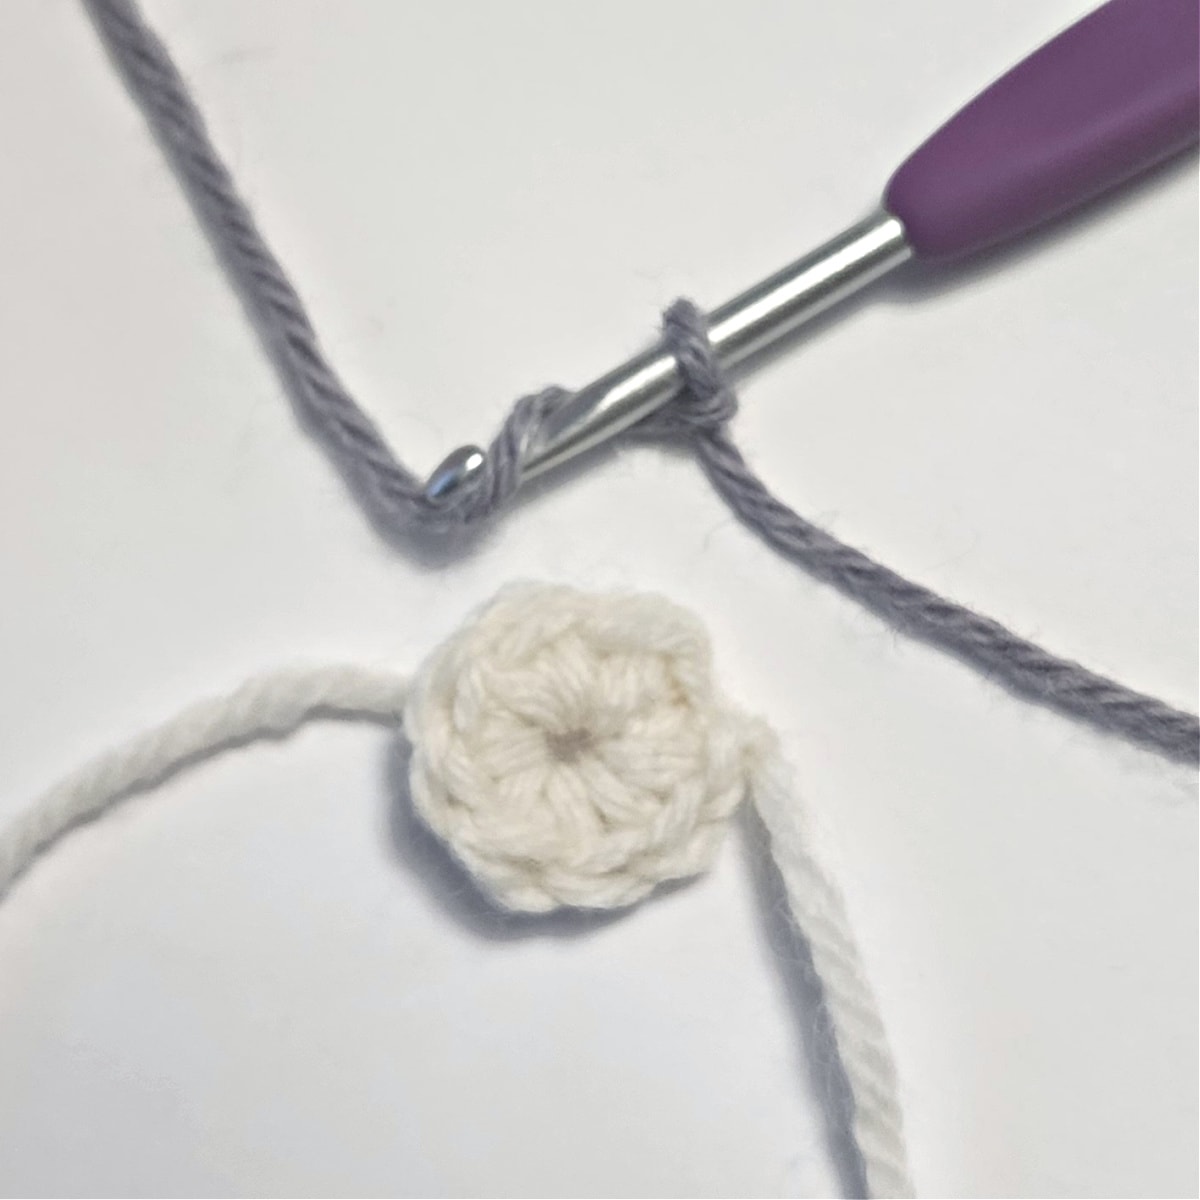 Small crochet circle with crochet hook and yarn to begin a double crochet cluster stitch.